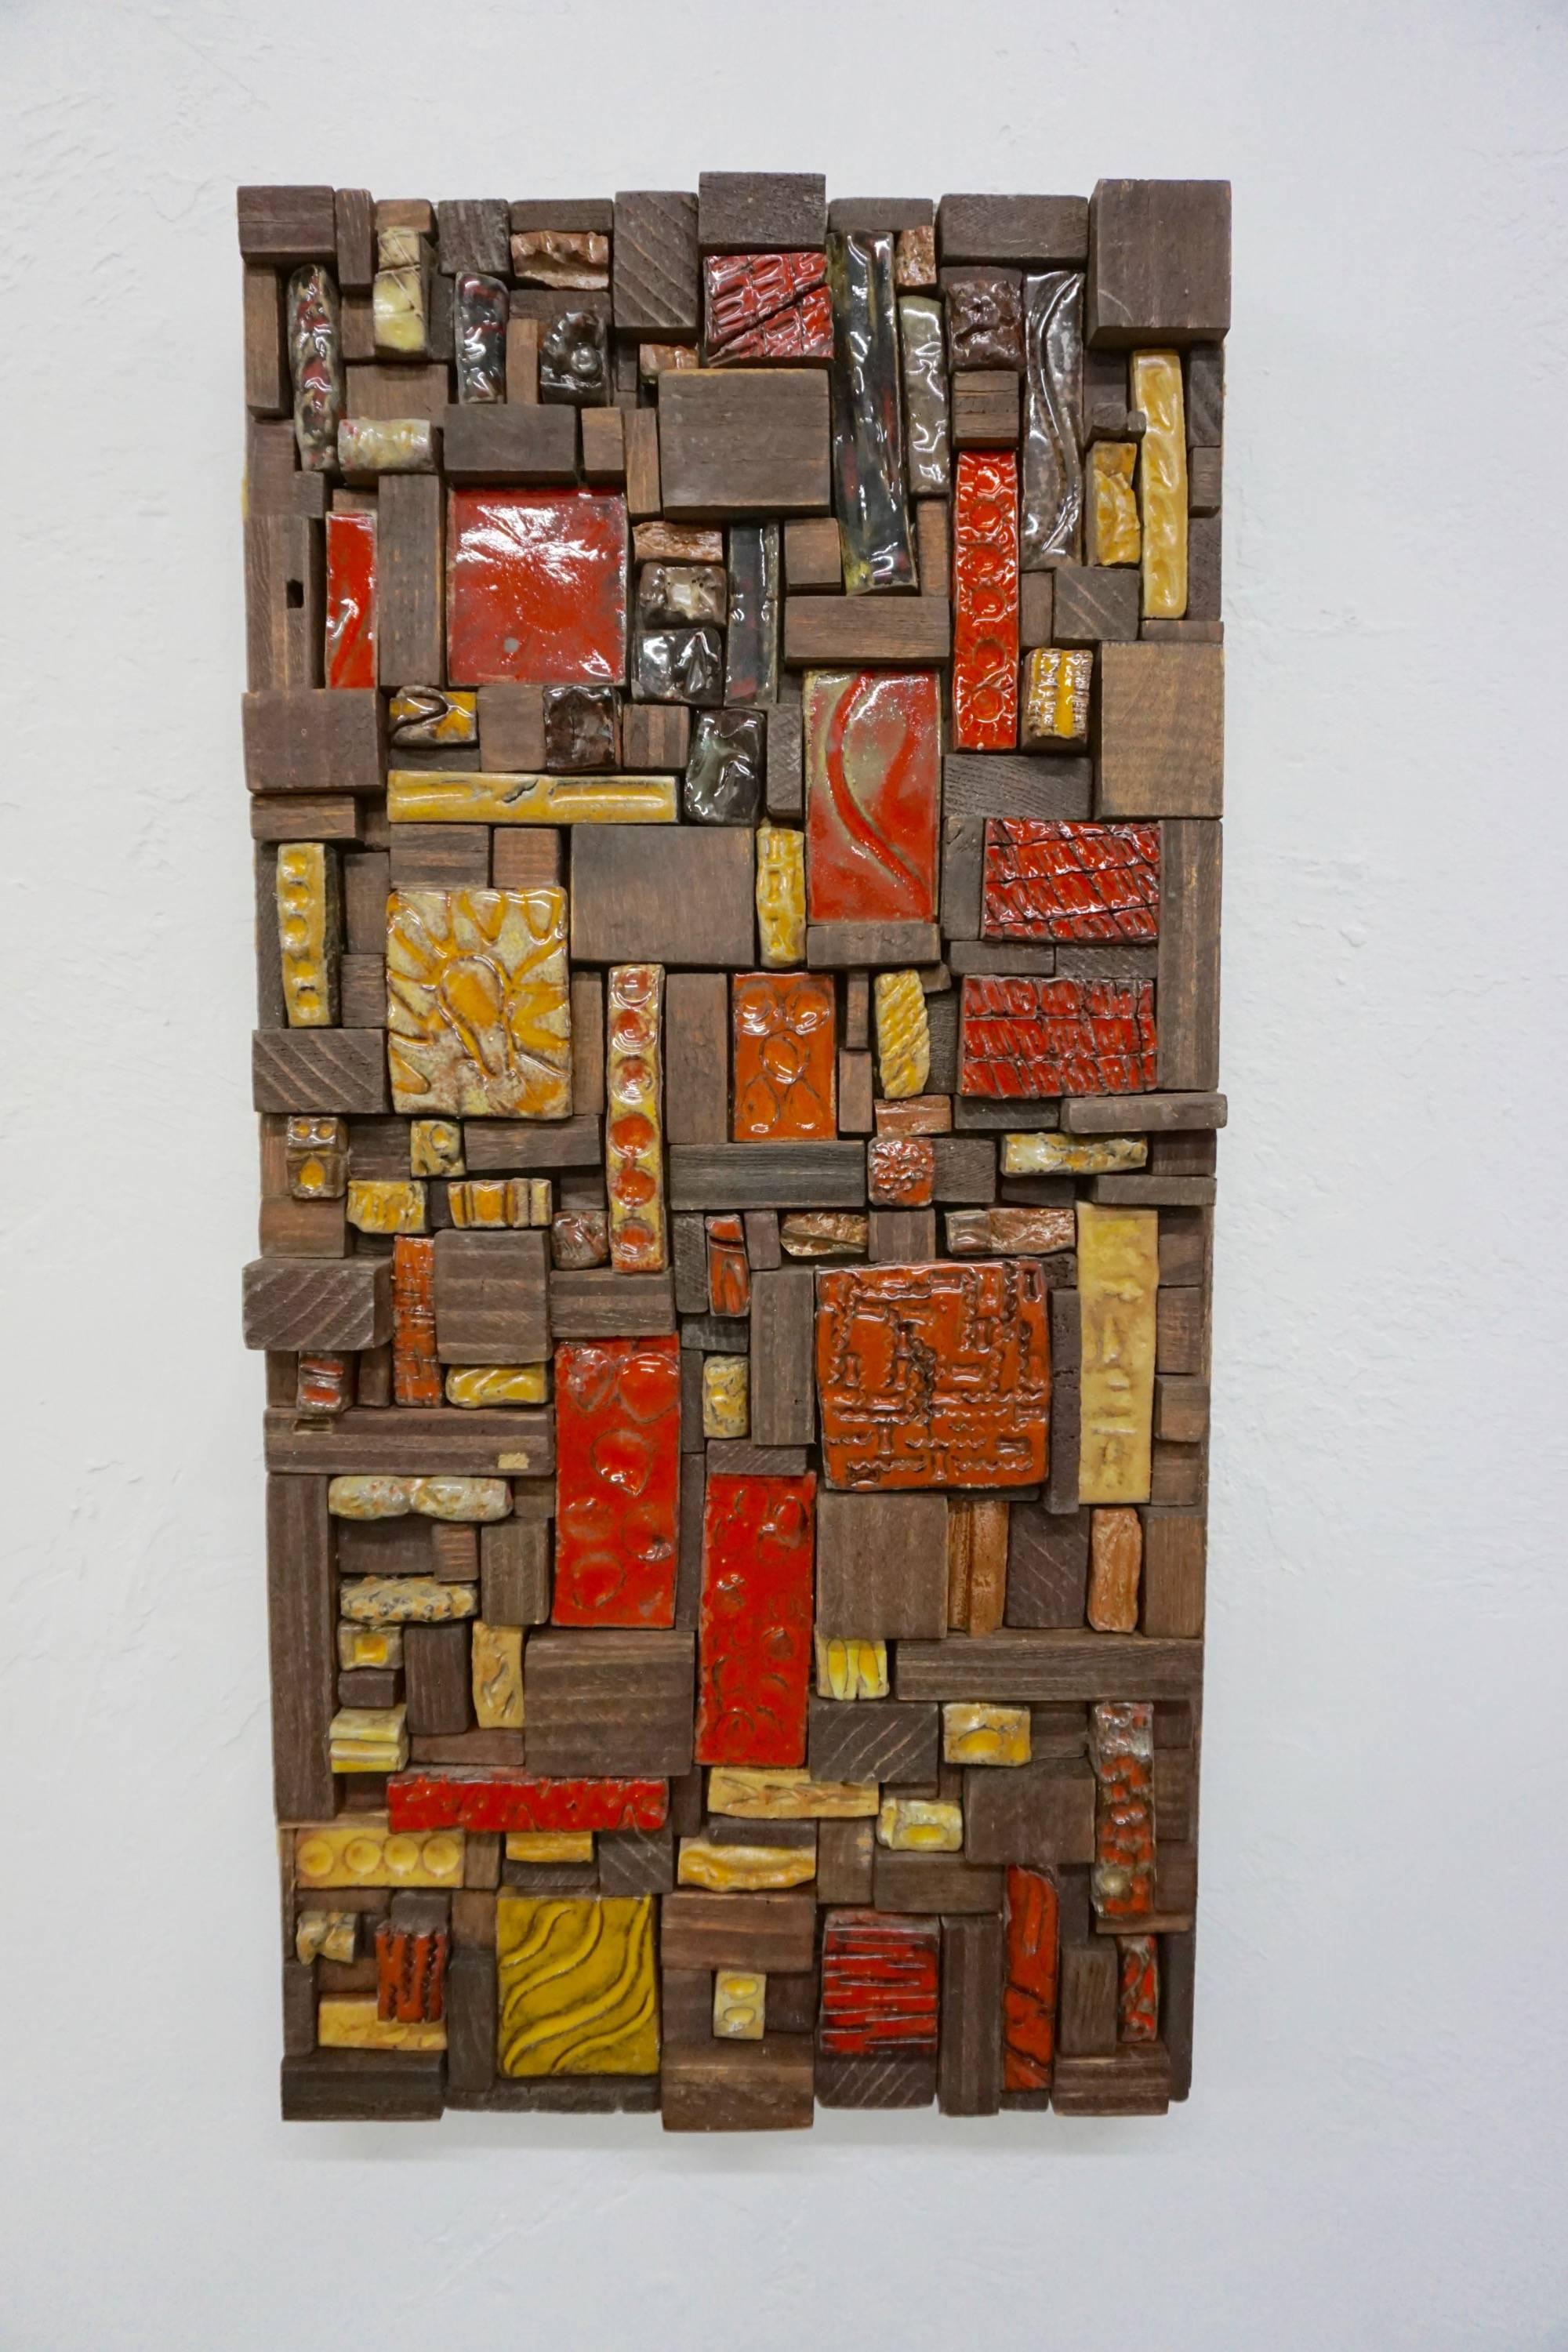 Glazed and etched tiles combined with wood blocks, mounted on a wood background.
Unsigned.